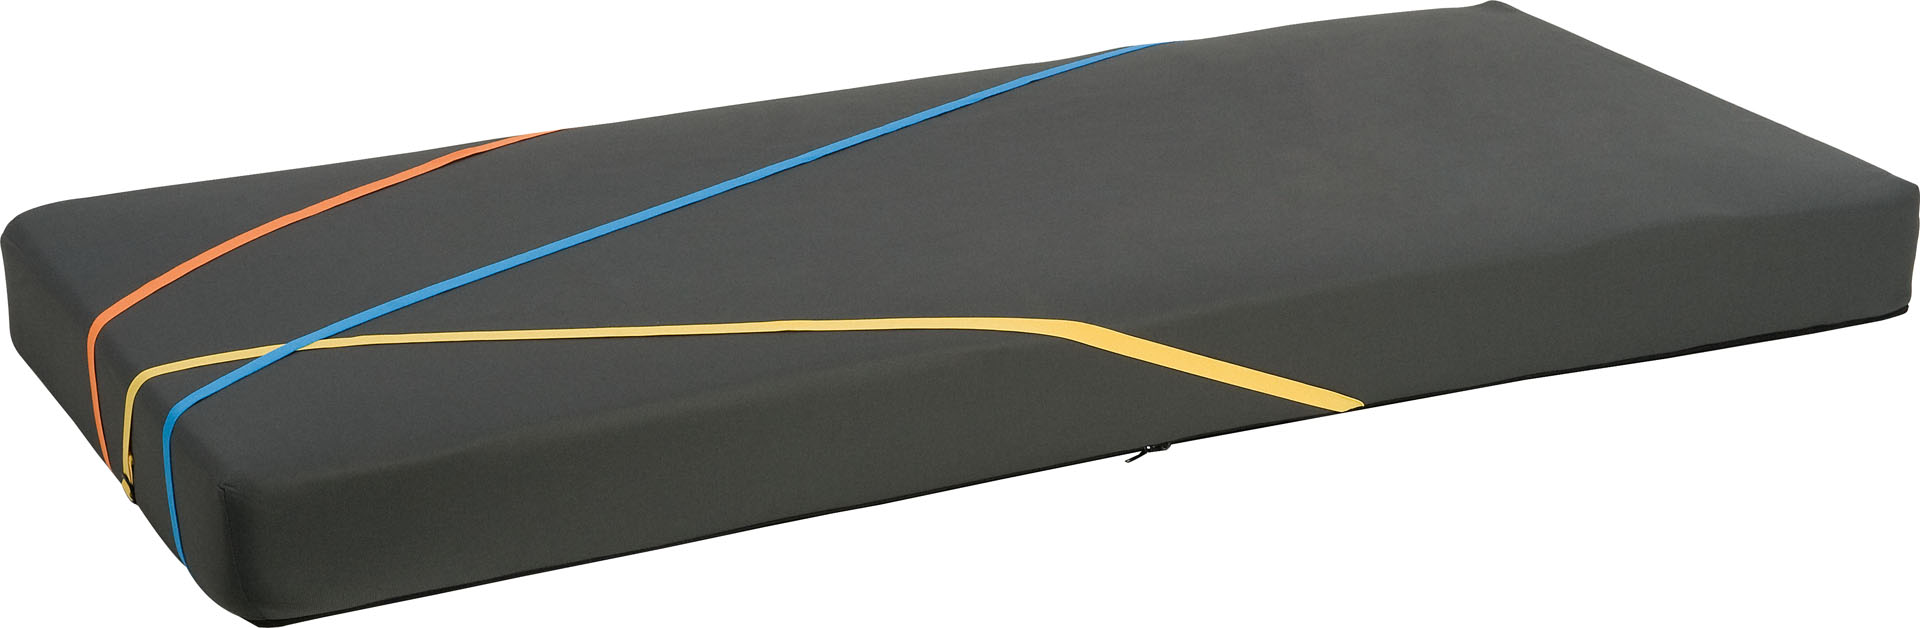 Mattress Breakdance 90x200 with Evolve cover